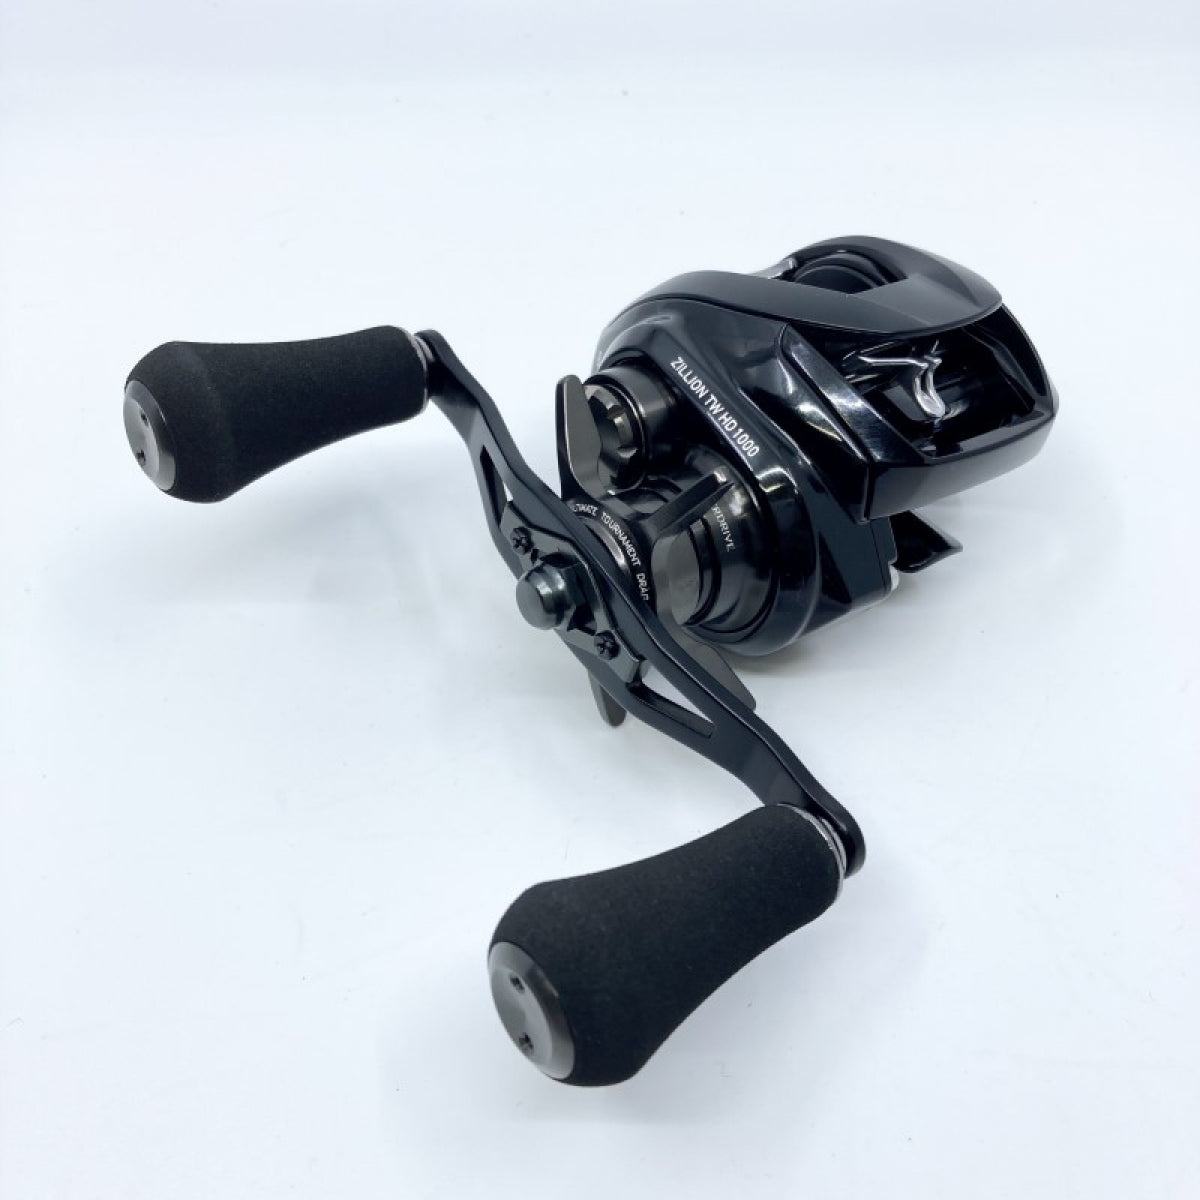 JDM Spinning Reels Availability?